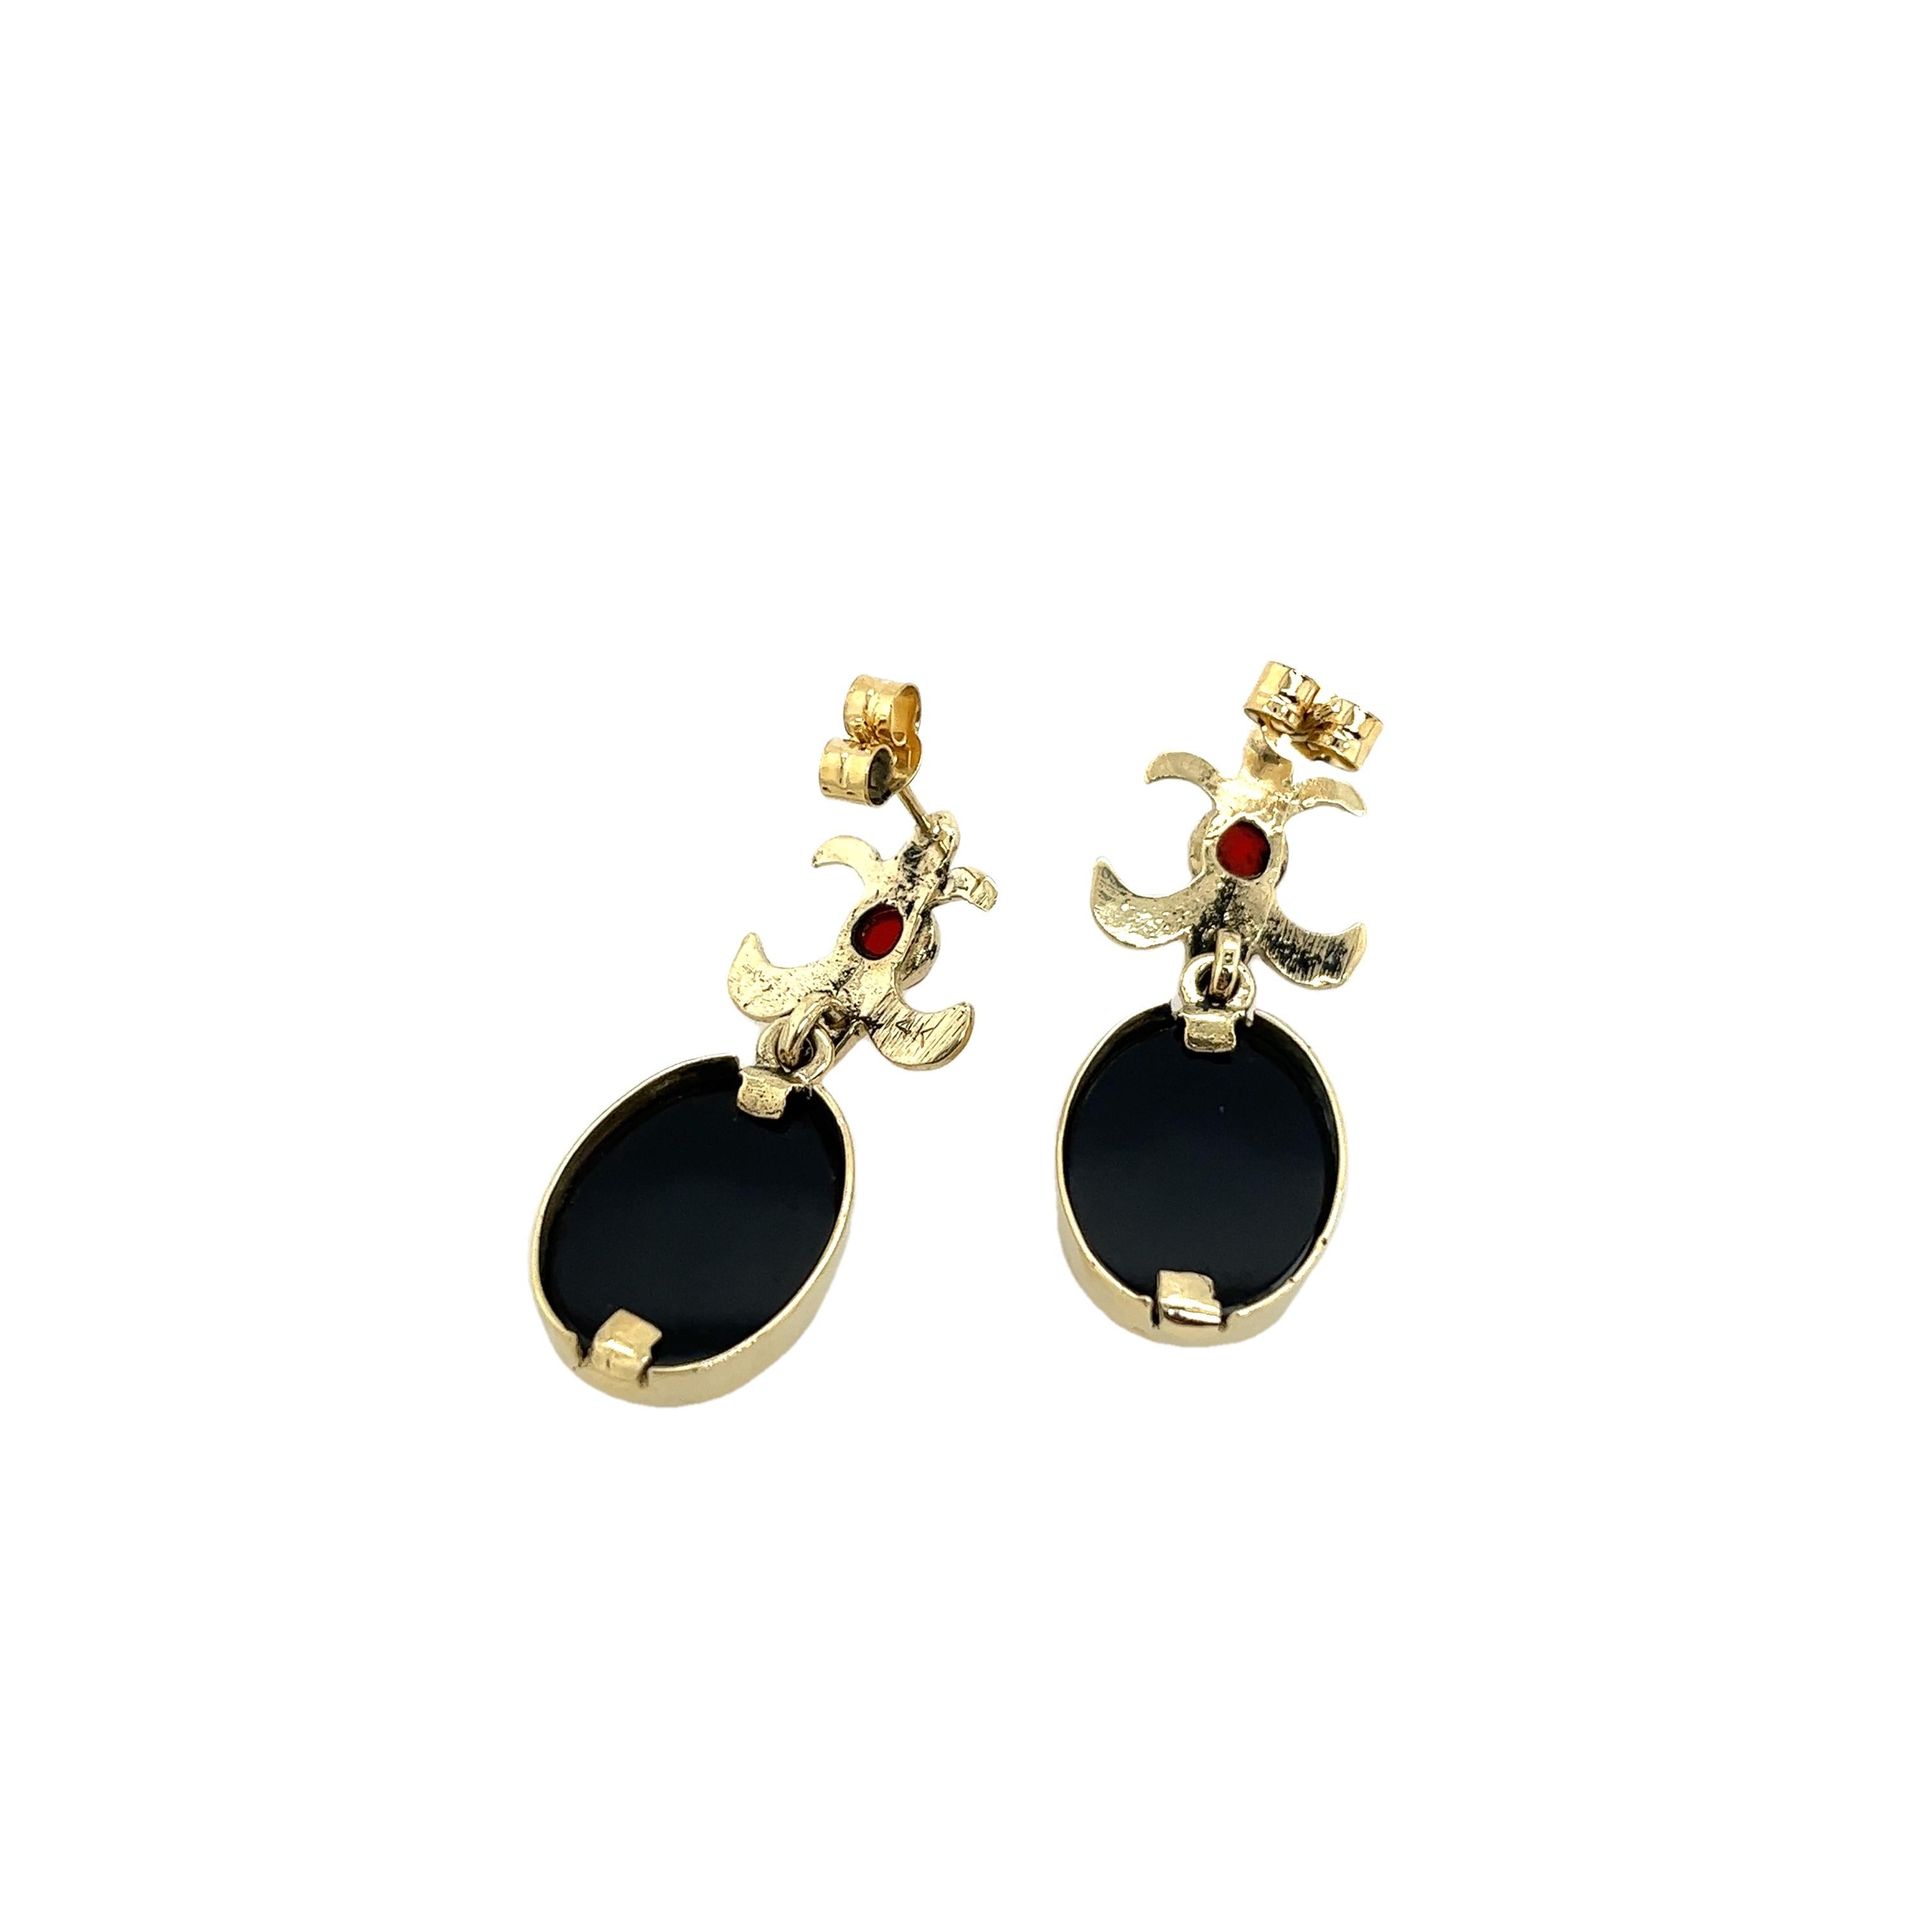 Oval Cut 14ct Yellow Gold Drop Earrings Set With 2 Hematite Carved Onyx & 2 Garnets For Sale